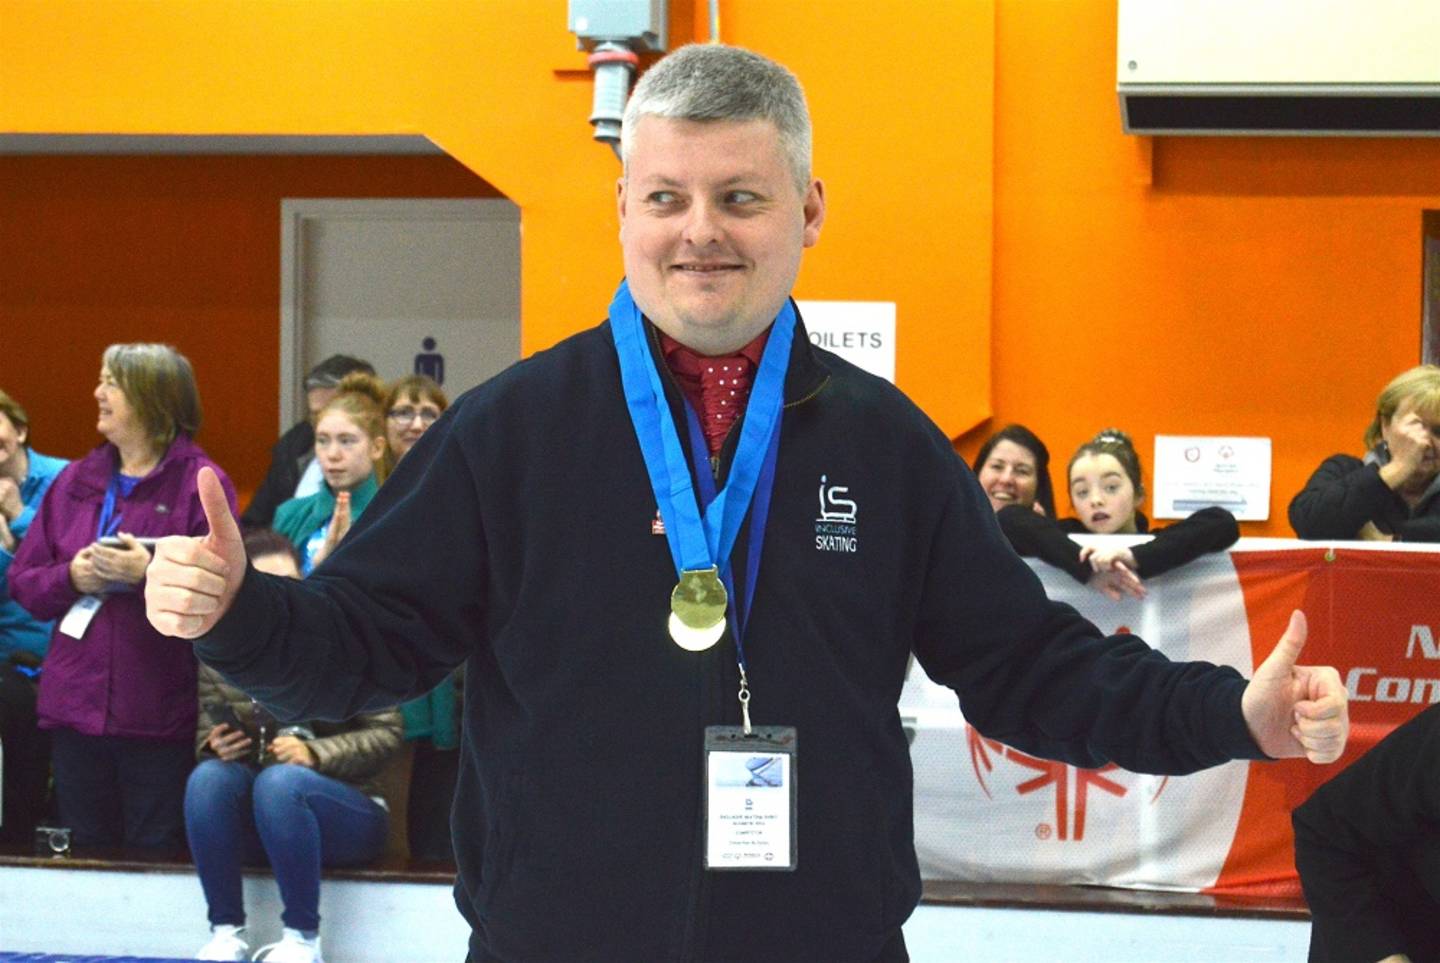 Image shows Jonathan smiling with medal at SOGB event 